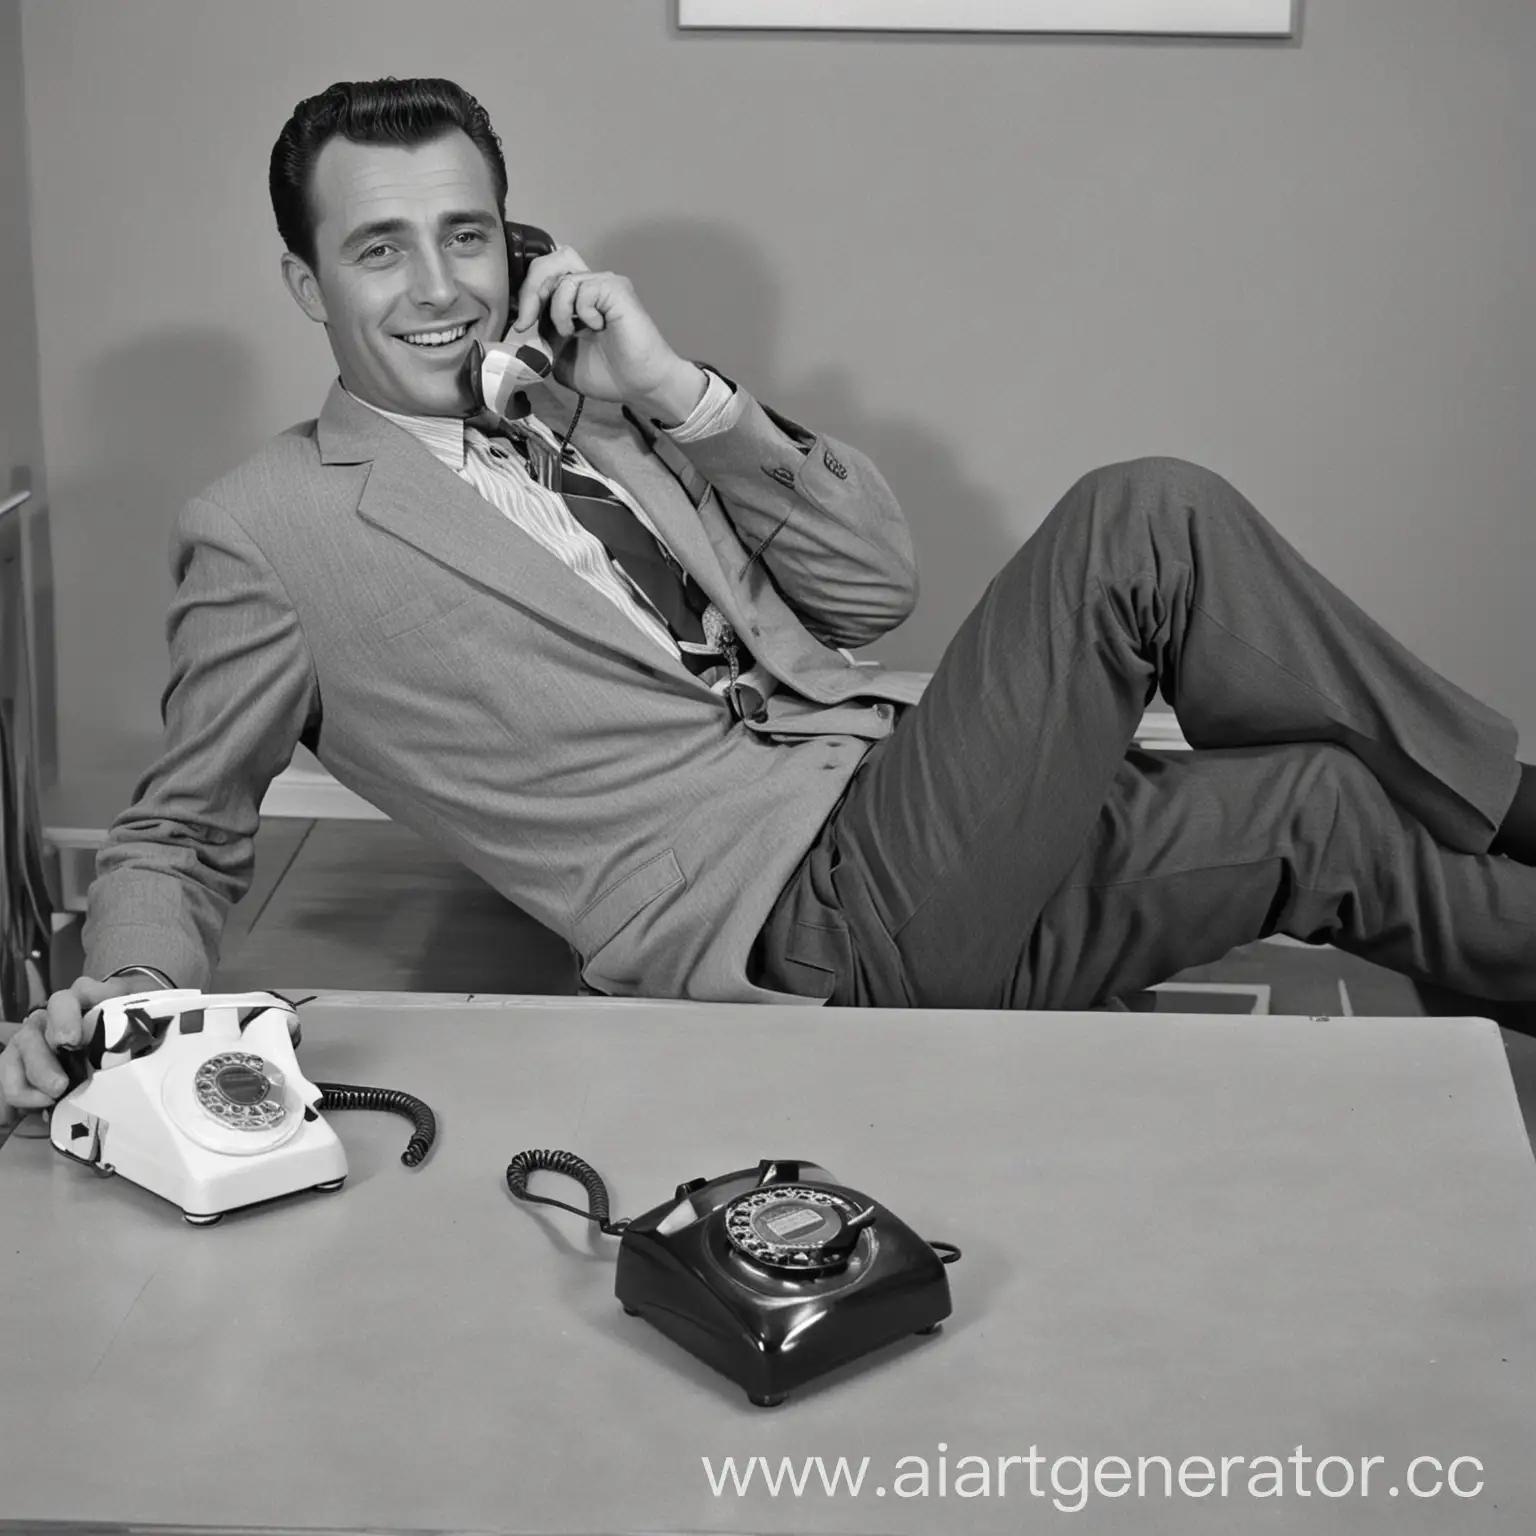 Vintage-Man-Talking-on-Phone-with-Feet-Up-on-Table